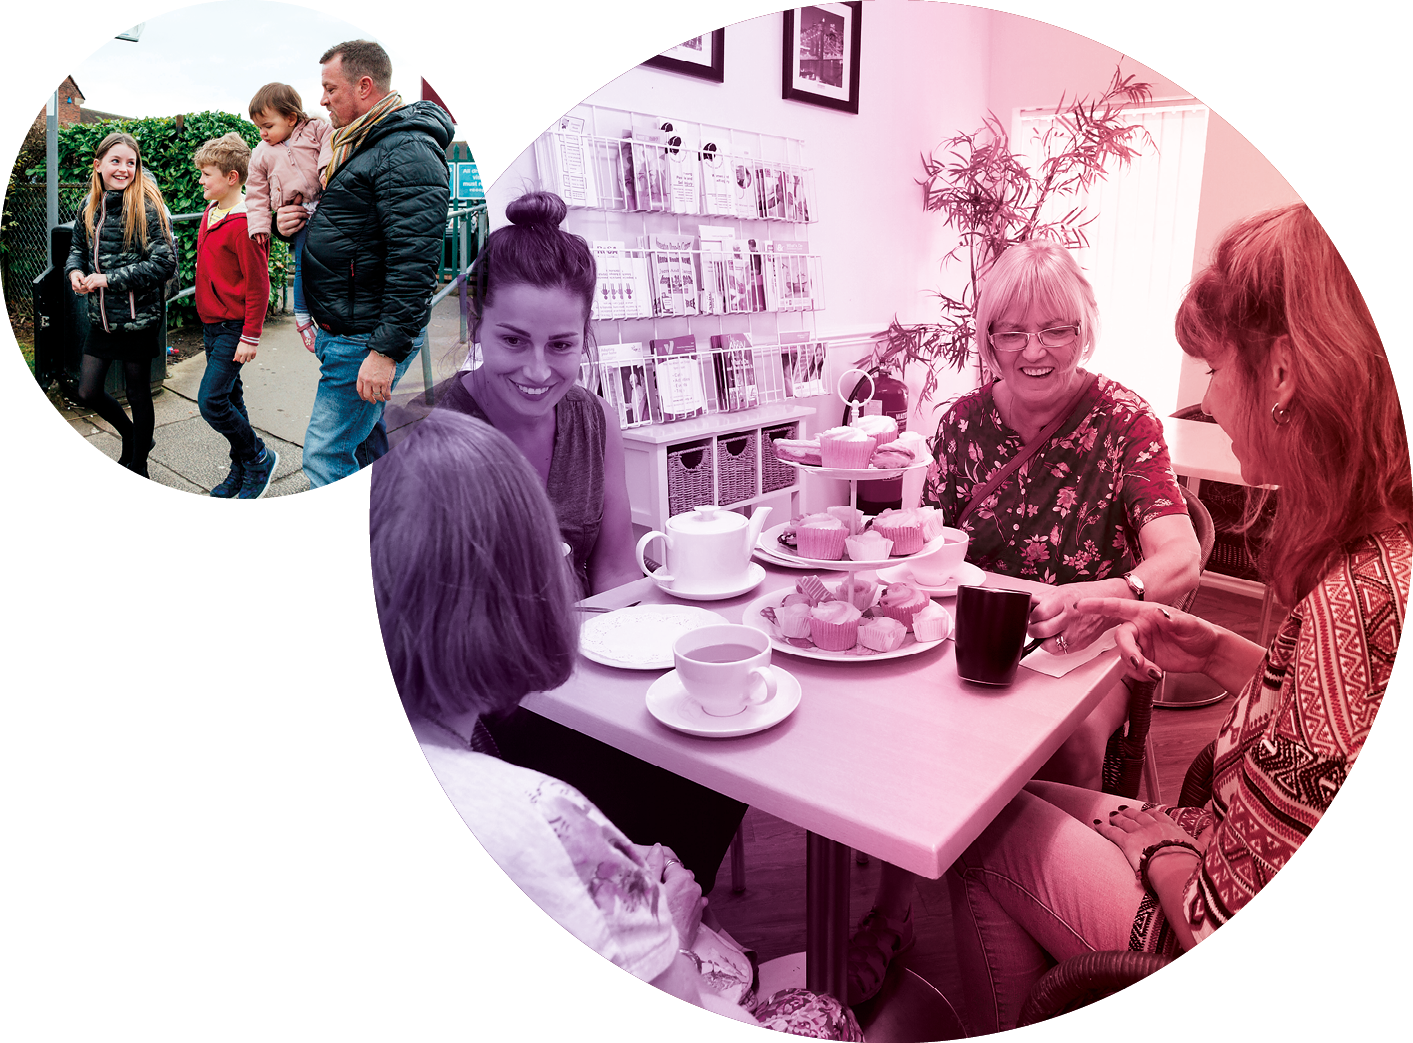 Images of family coming home from school and a care home tea party